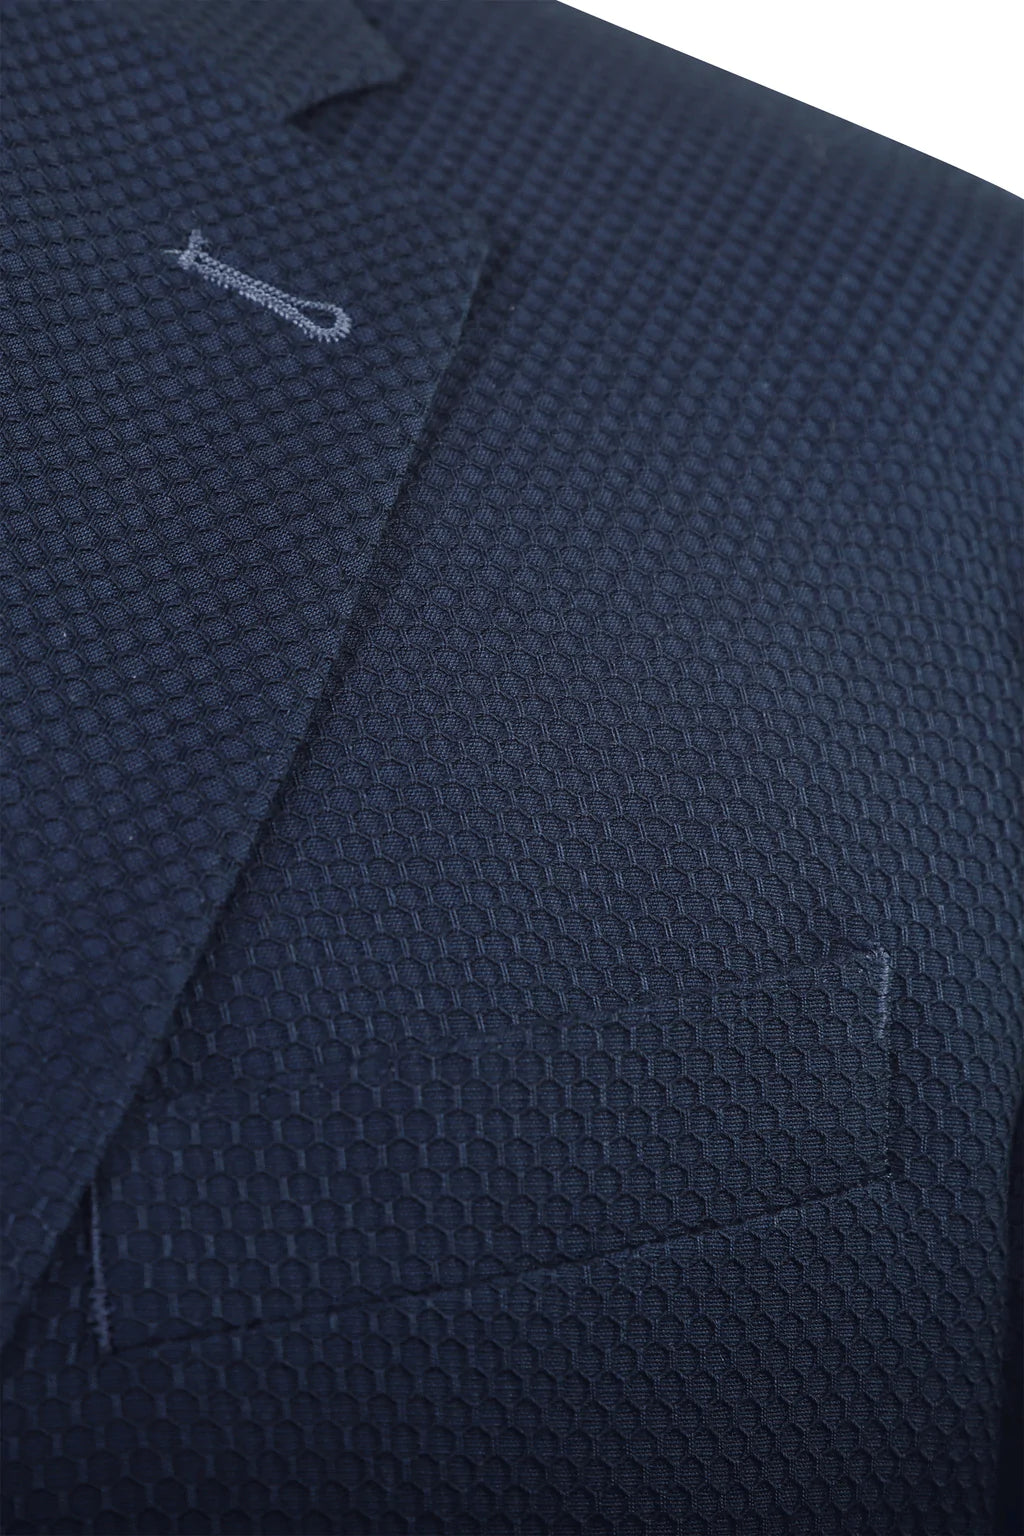 A blue blazer, but with a honeycomb stitch overtop, giving an almost three dimensional design to the coat. Like most 7 Downie St. sport coats, the Aragon has a generous amount of stretch, allowing you to look your best without compromising comfort.